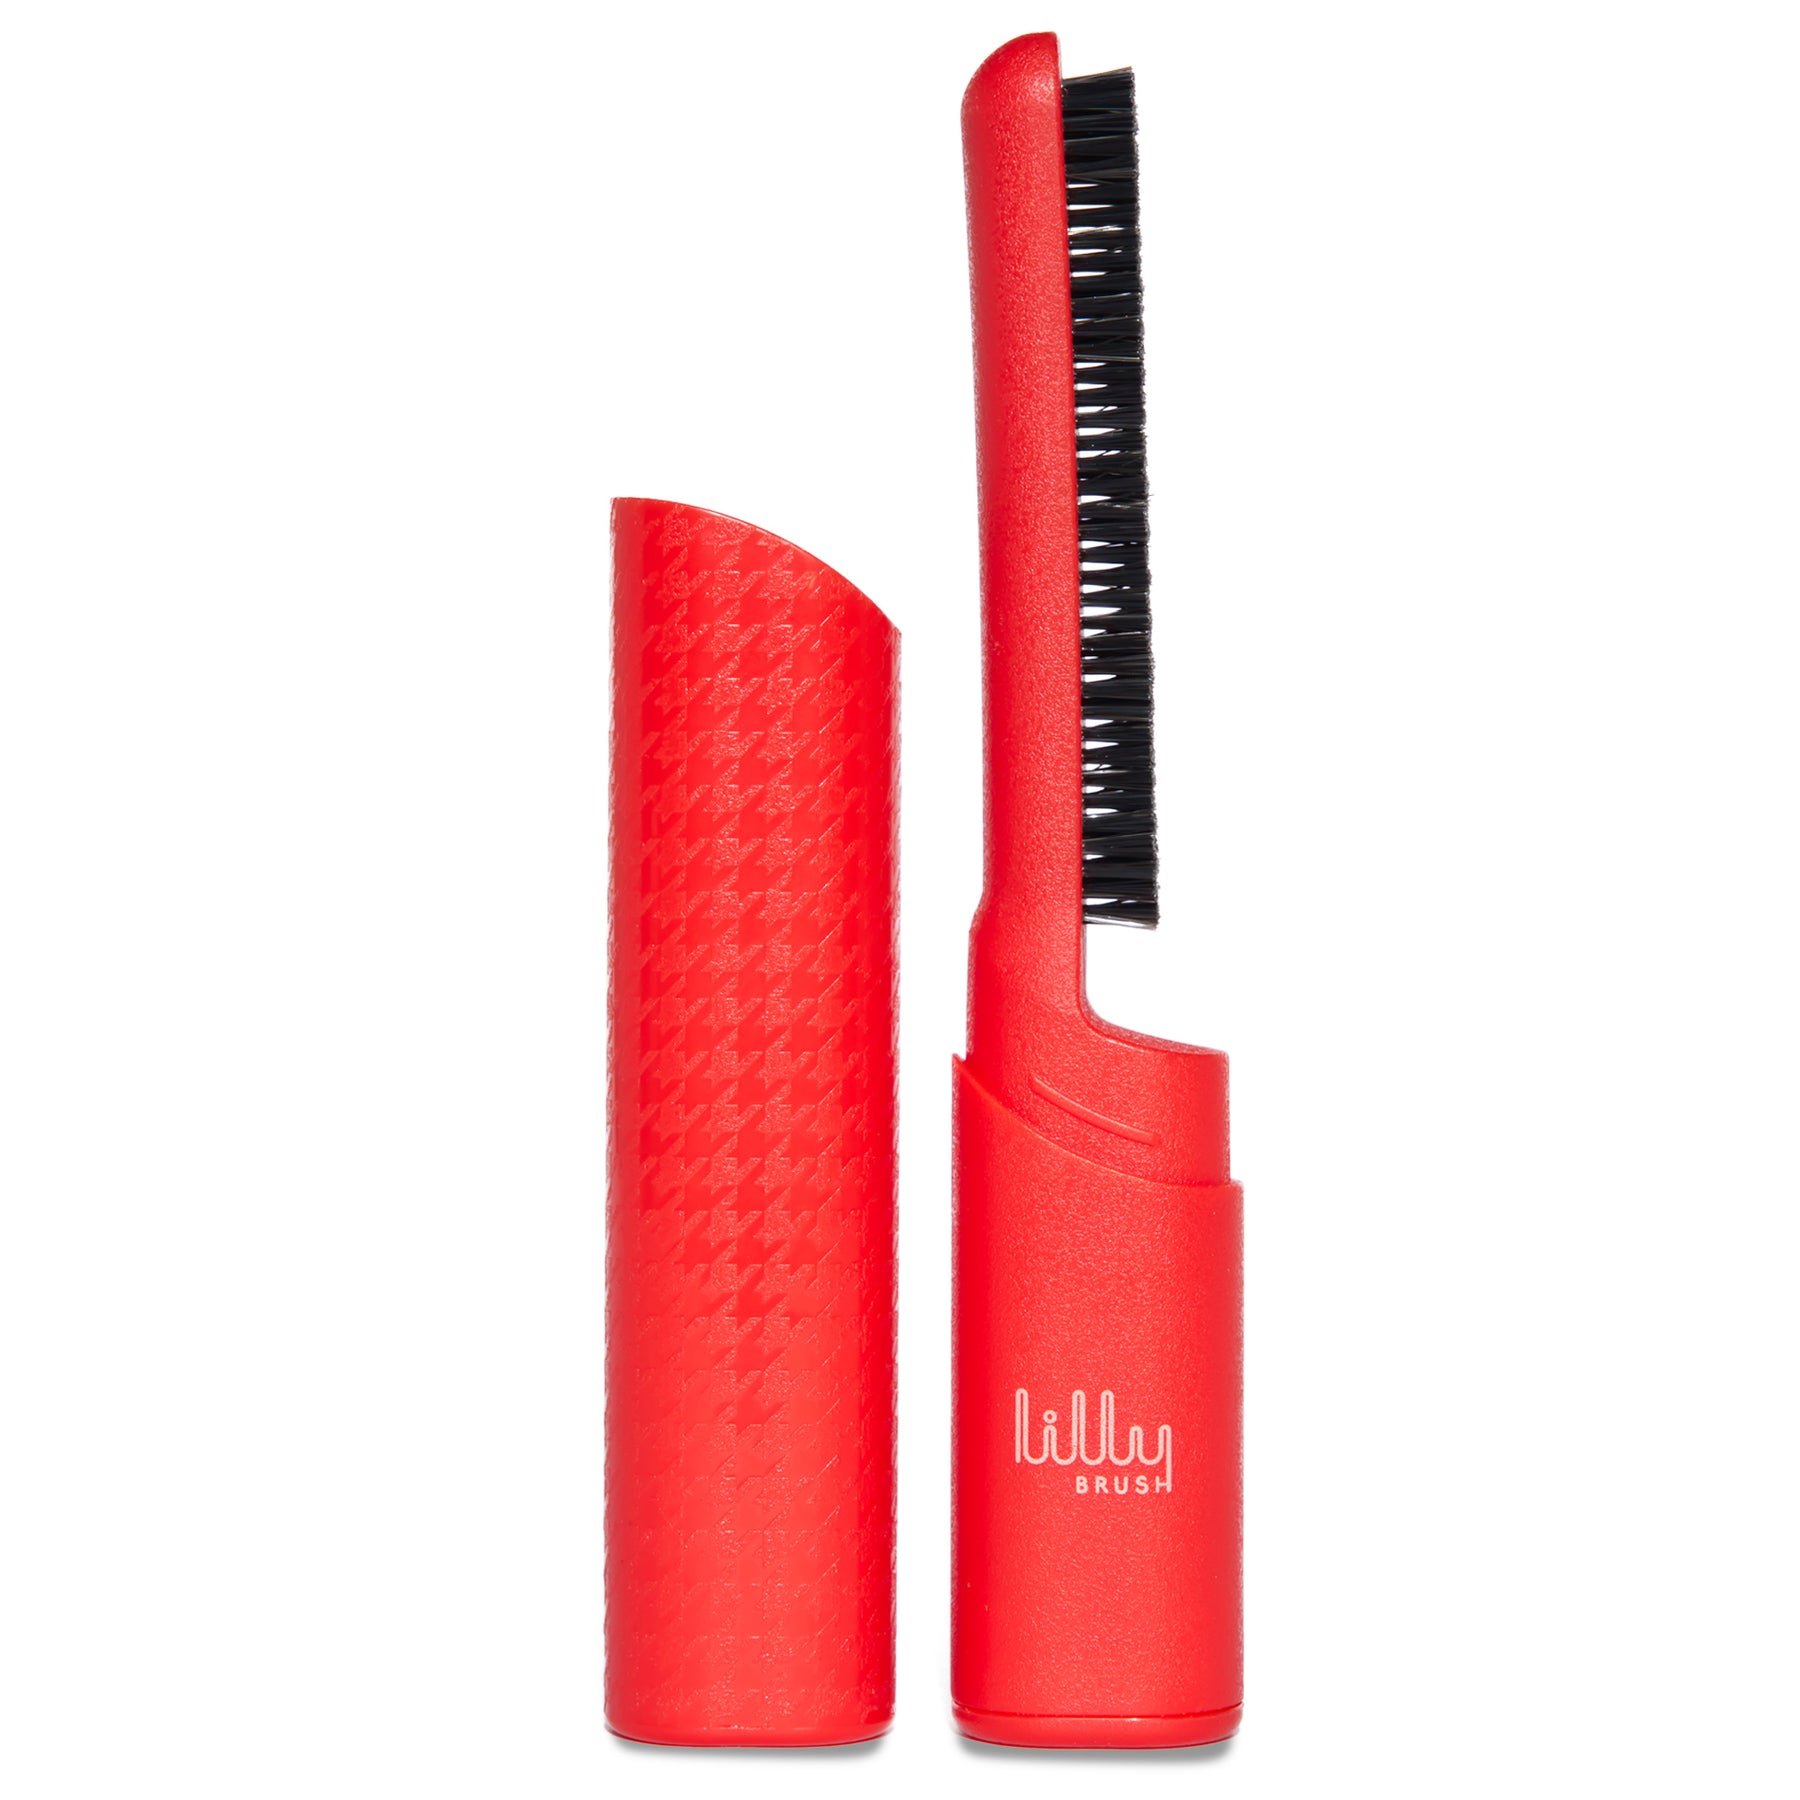 Lilly Brush Be Forever Furless Mini Red